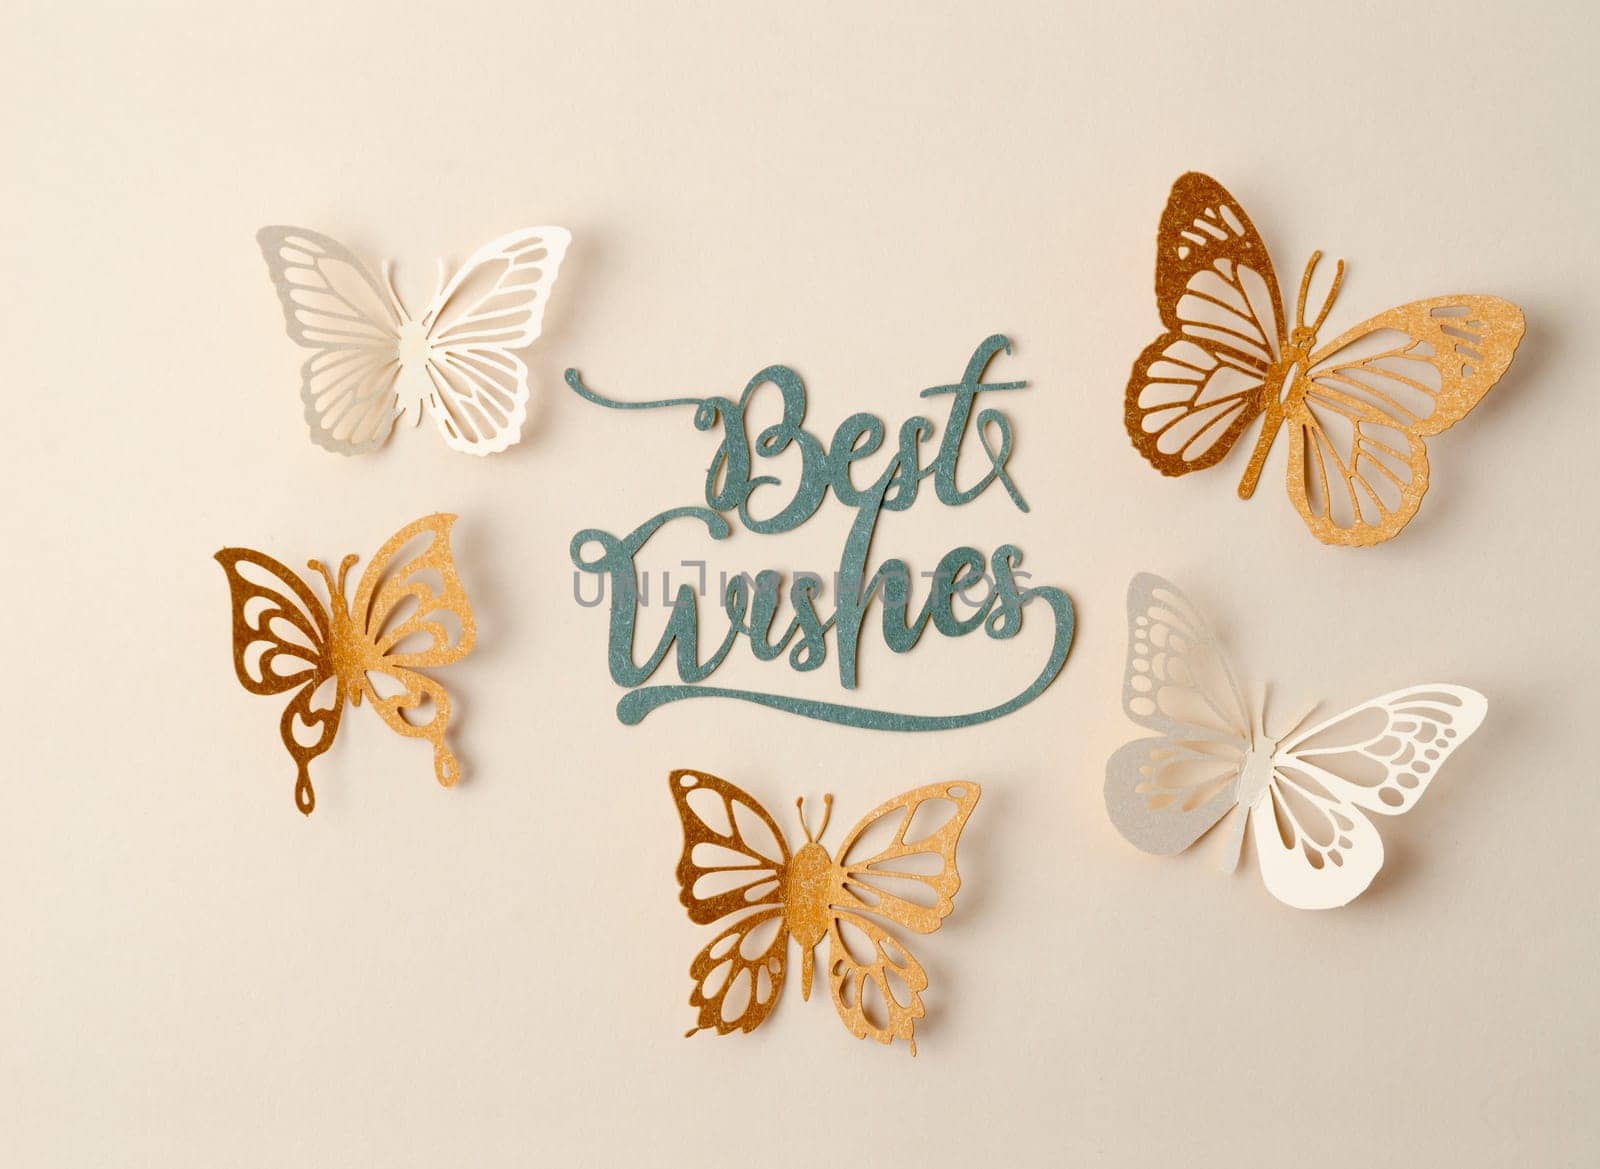 The Bests Wishes text with butterfly paper carve on pastel background. by Gamjai